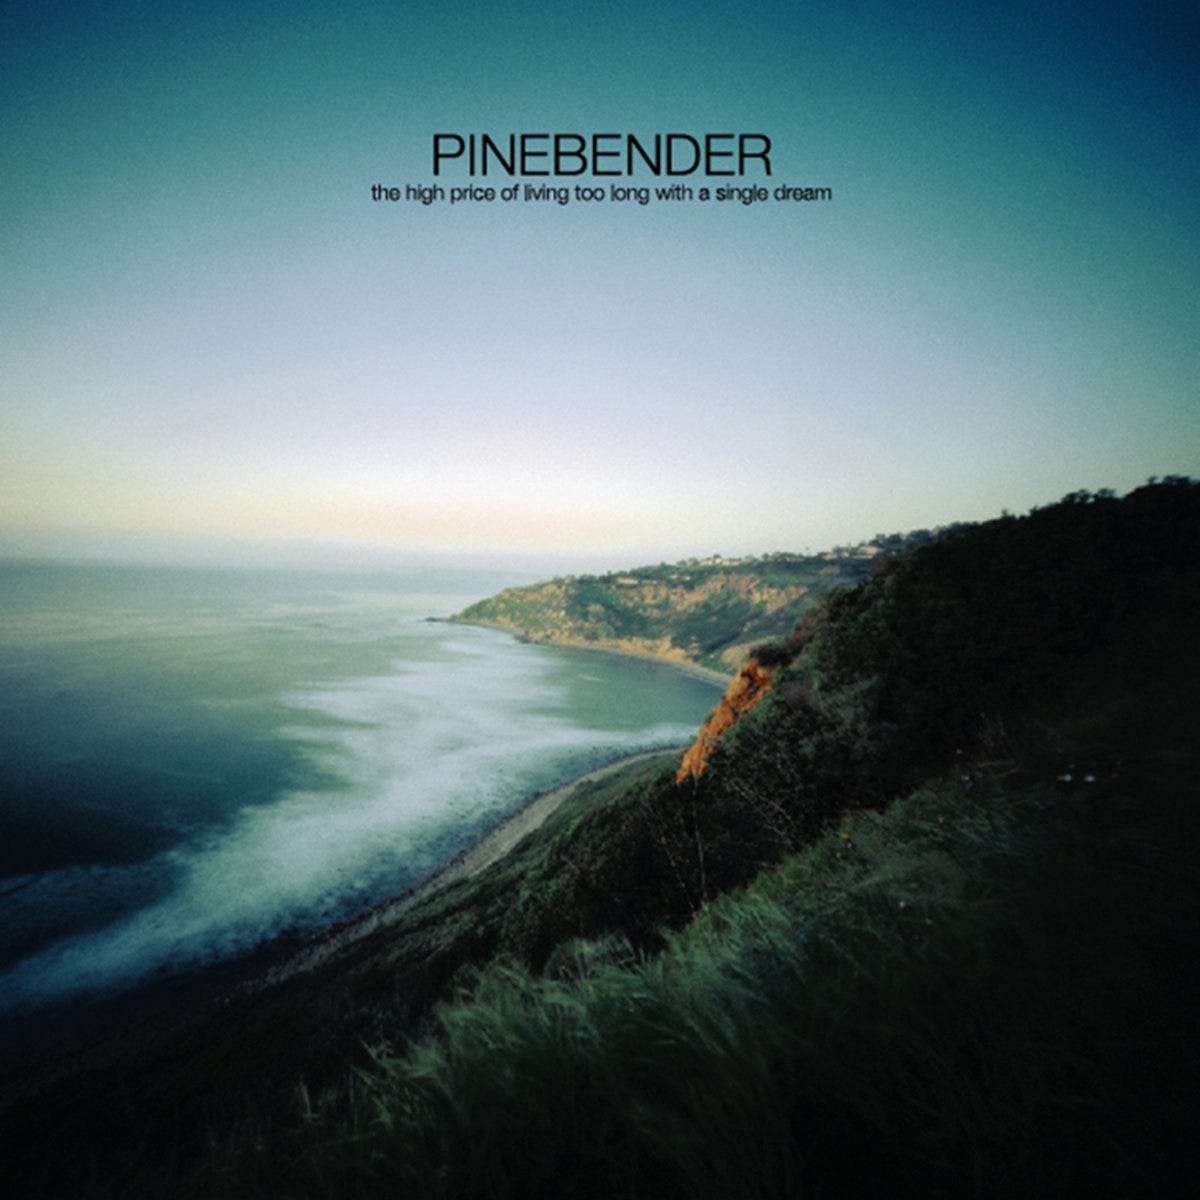 Pinebender - The High Price of Living Too Long With A Single Dream art